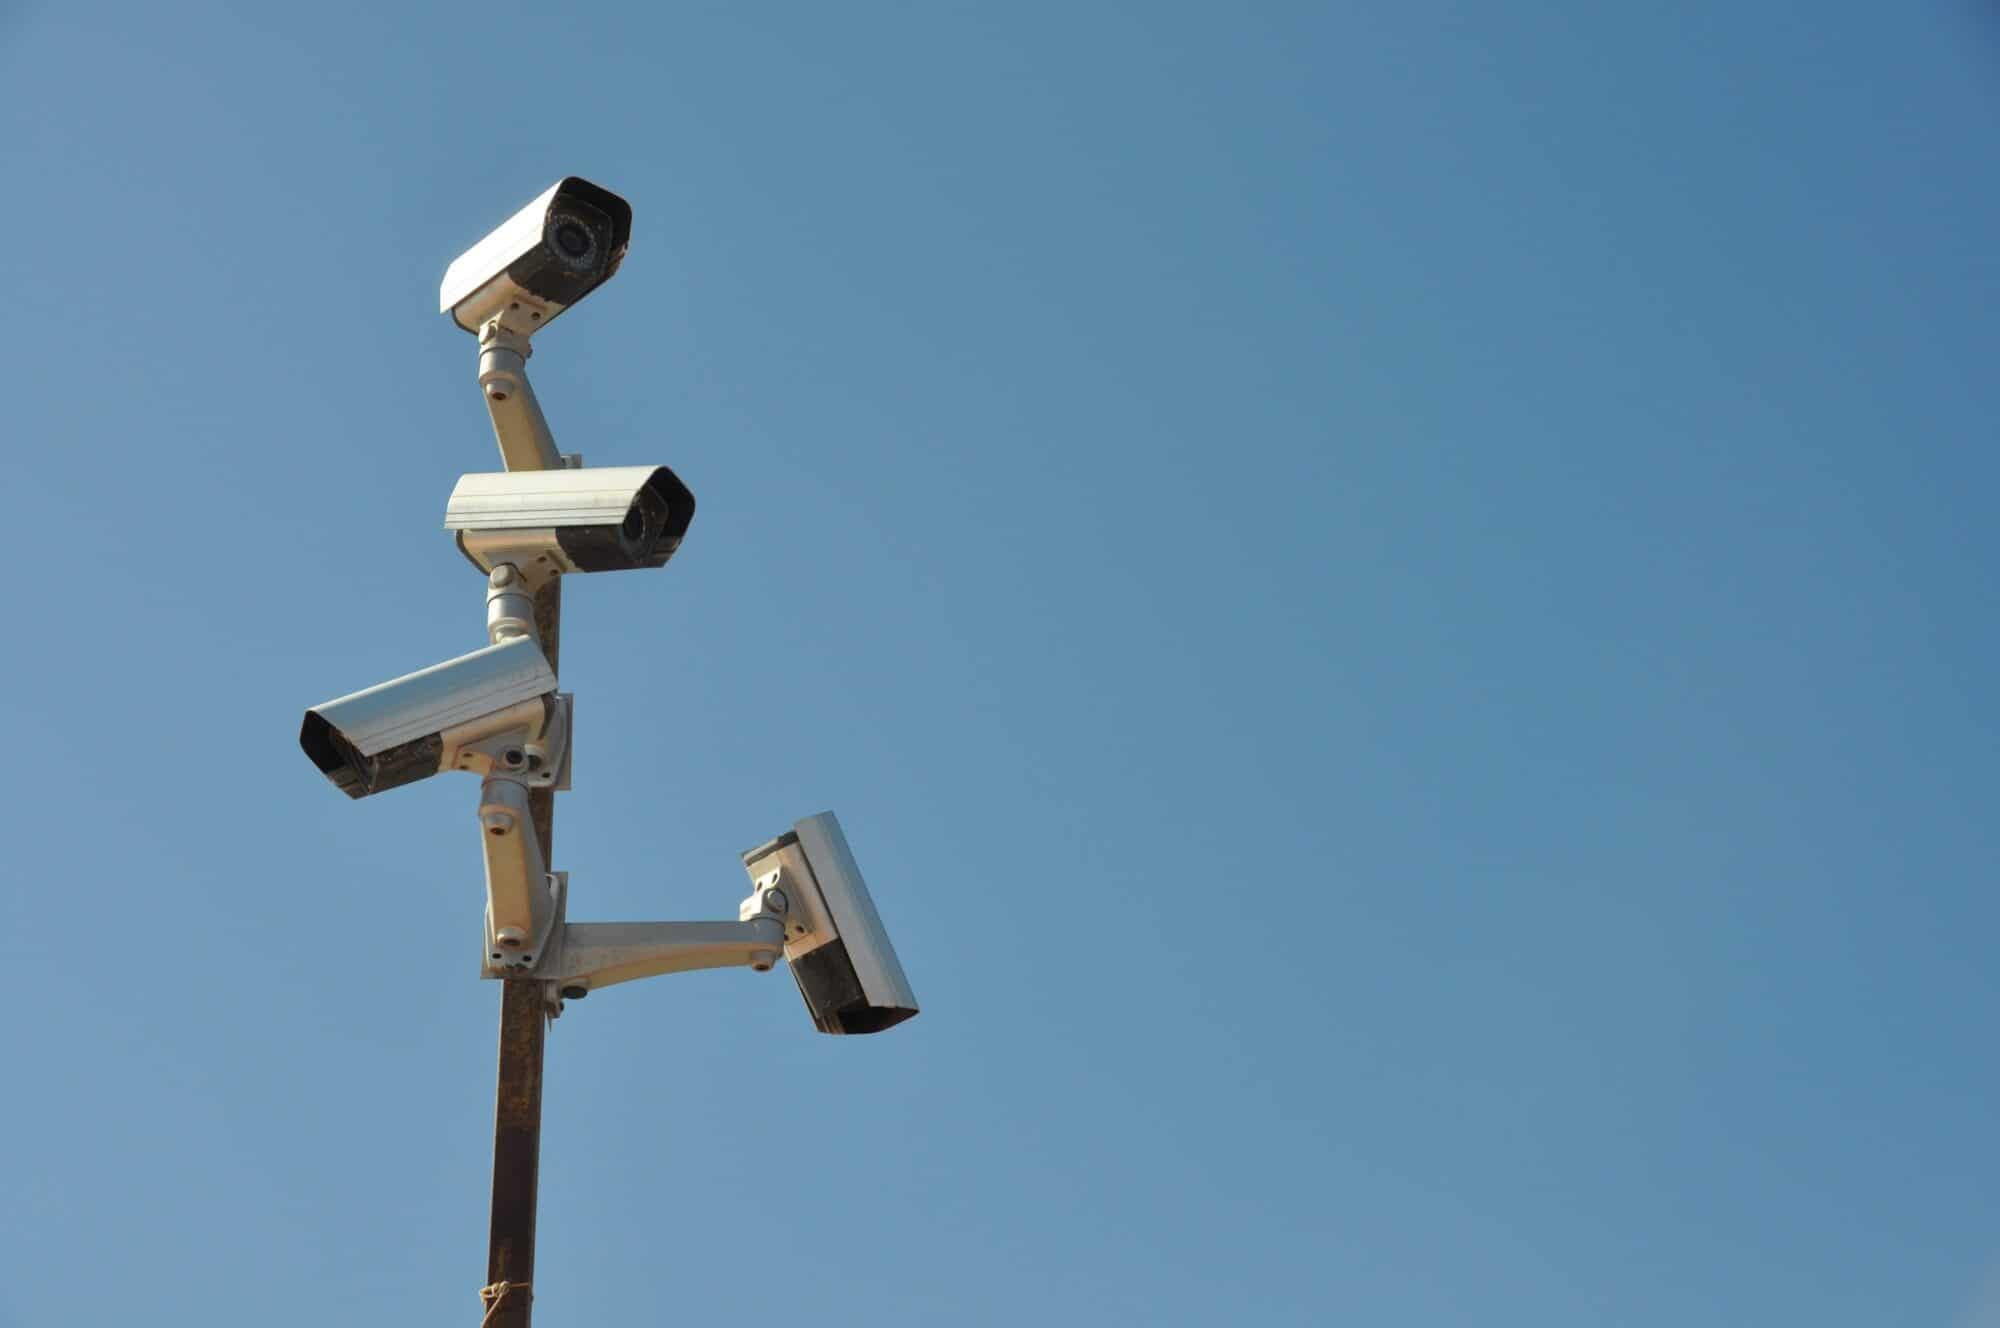 Four surveillance cameras pointed in different directions from a post against a blue sky.